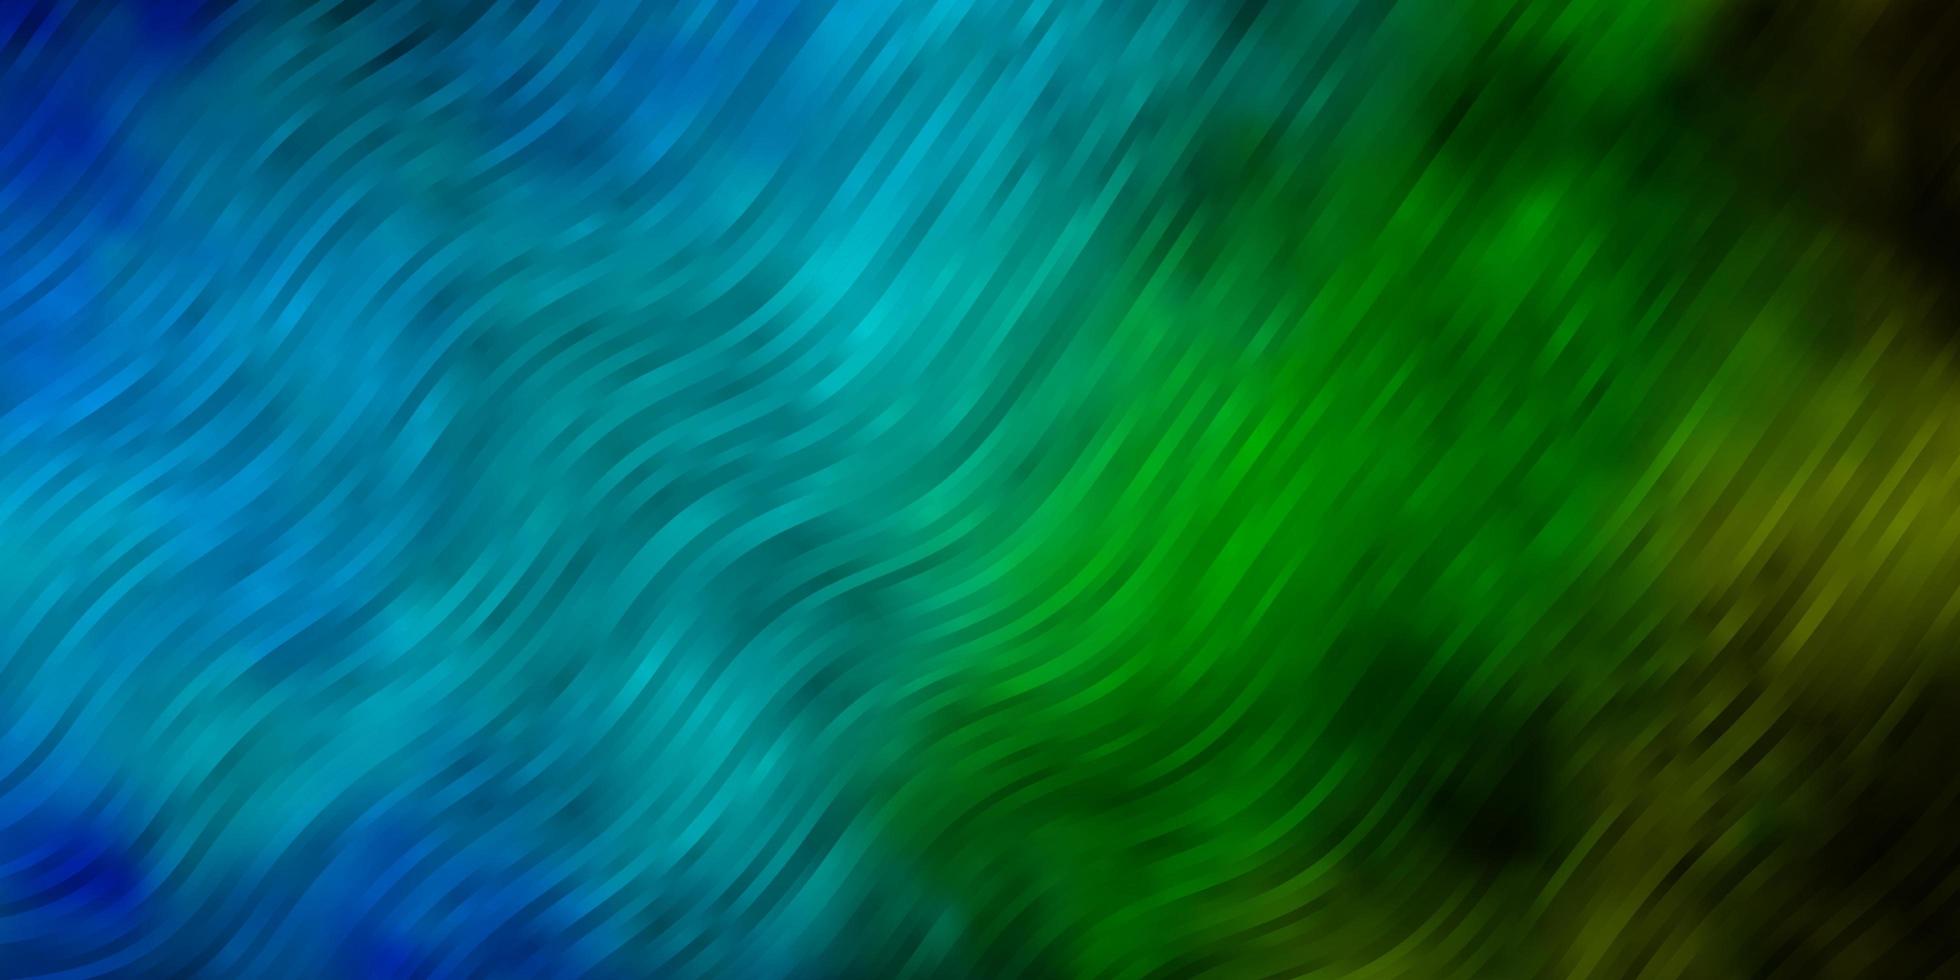 Light blue and green texture with waves vector